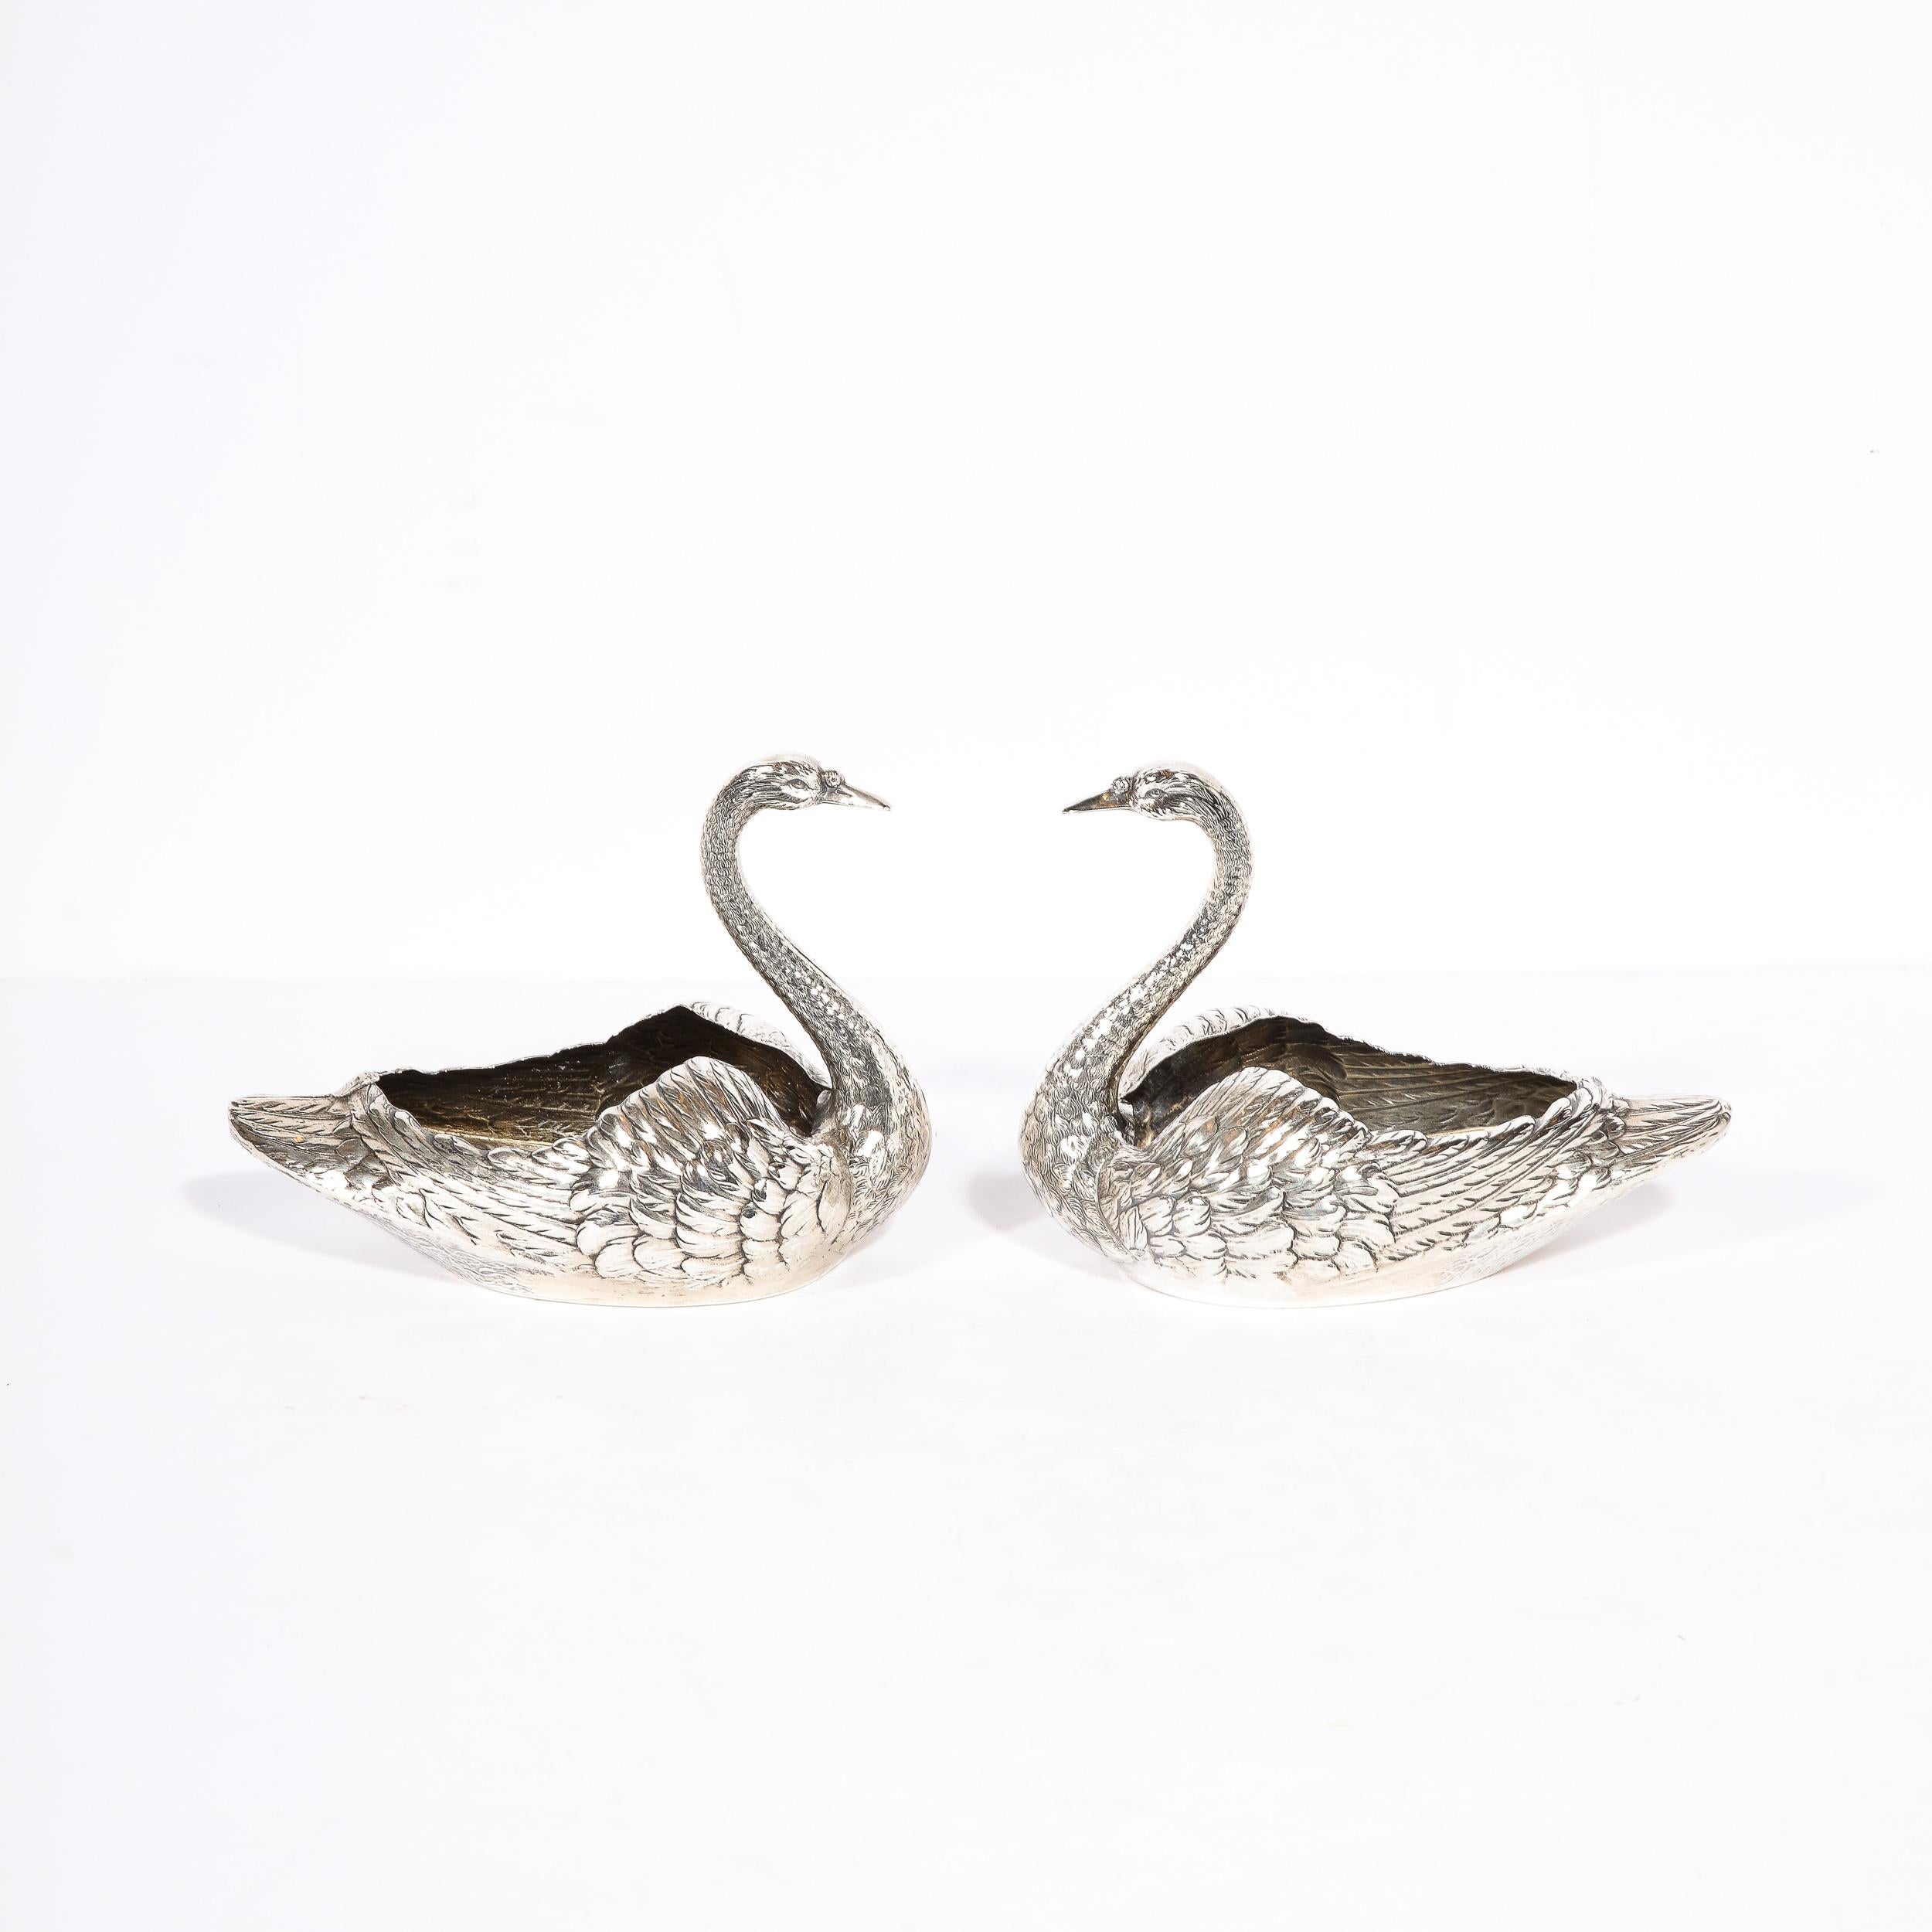 This beautiful pair of Art Deco Sterling silver swan decorative bowls were executed by the legendary American silver maker, Gorham circa 1920. They feature elegantly streamlined demilune form bottoms and undulating tops. The stylized and sinuous